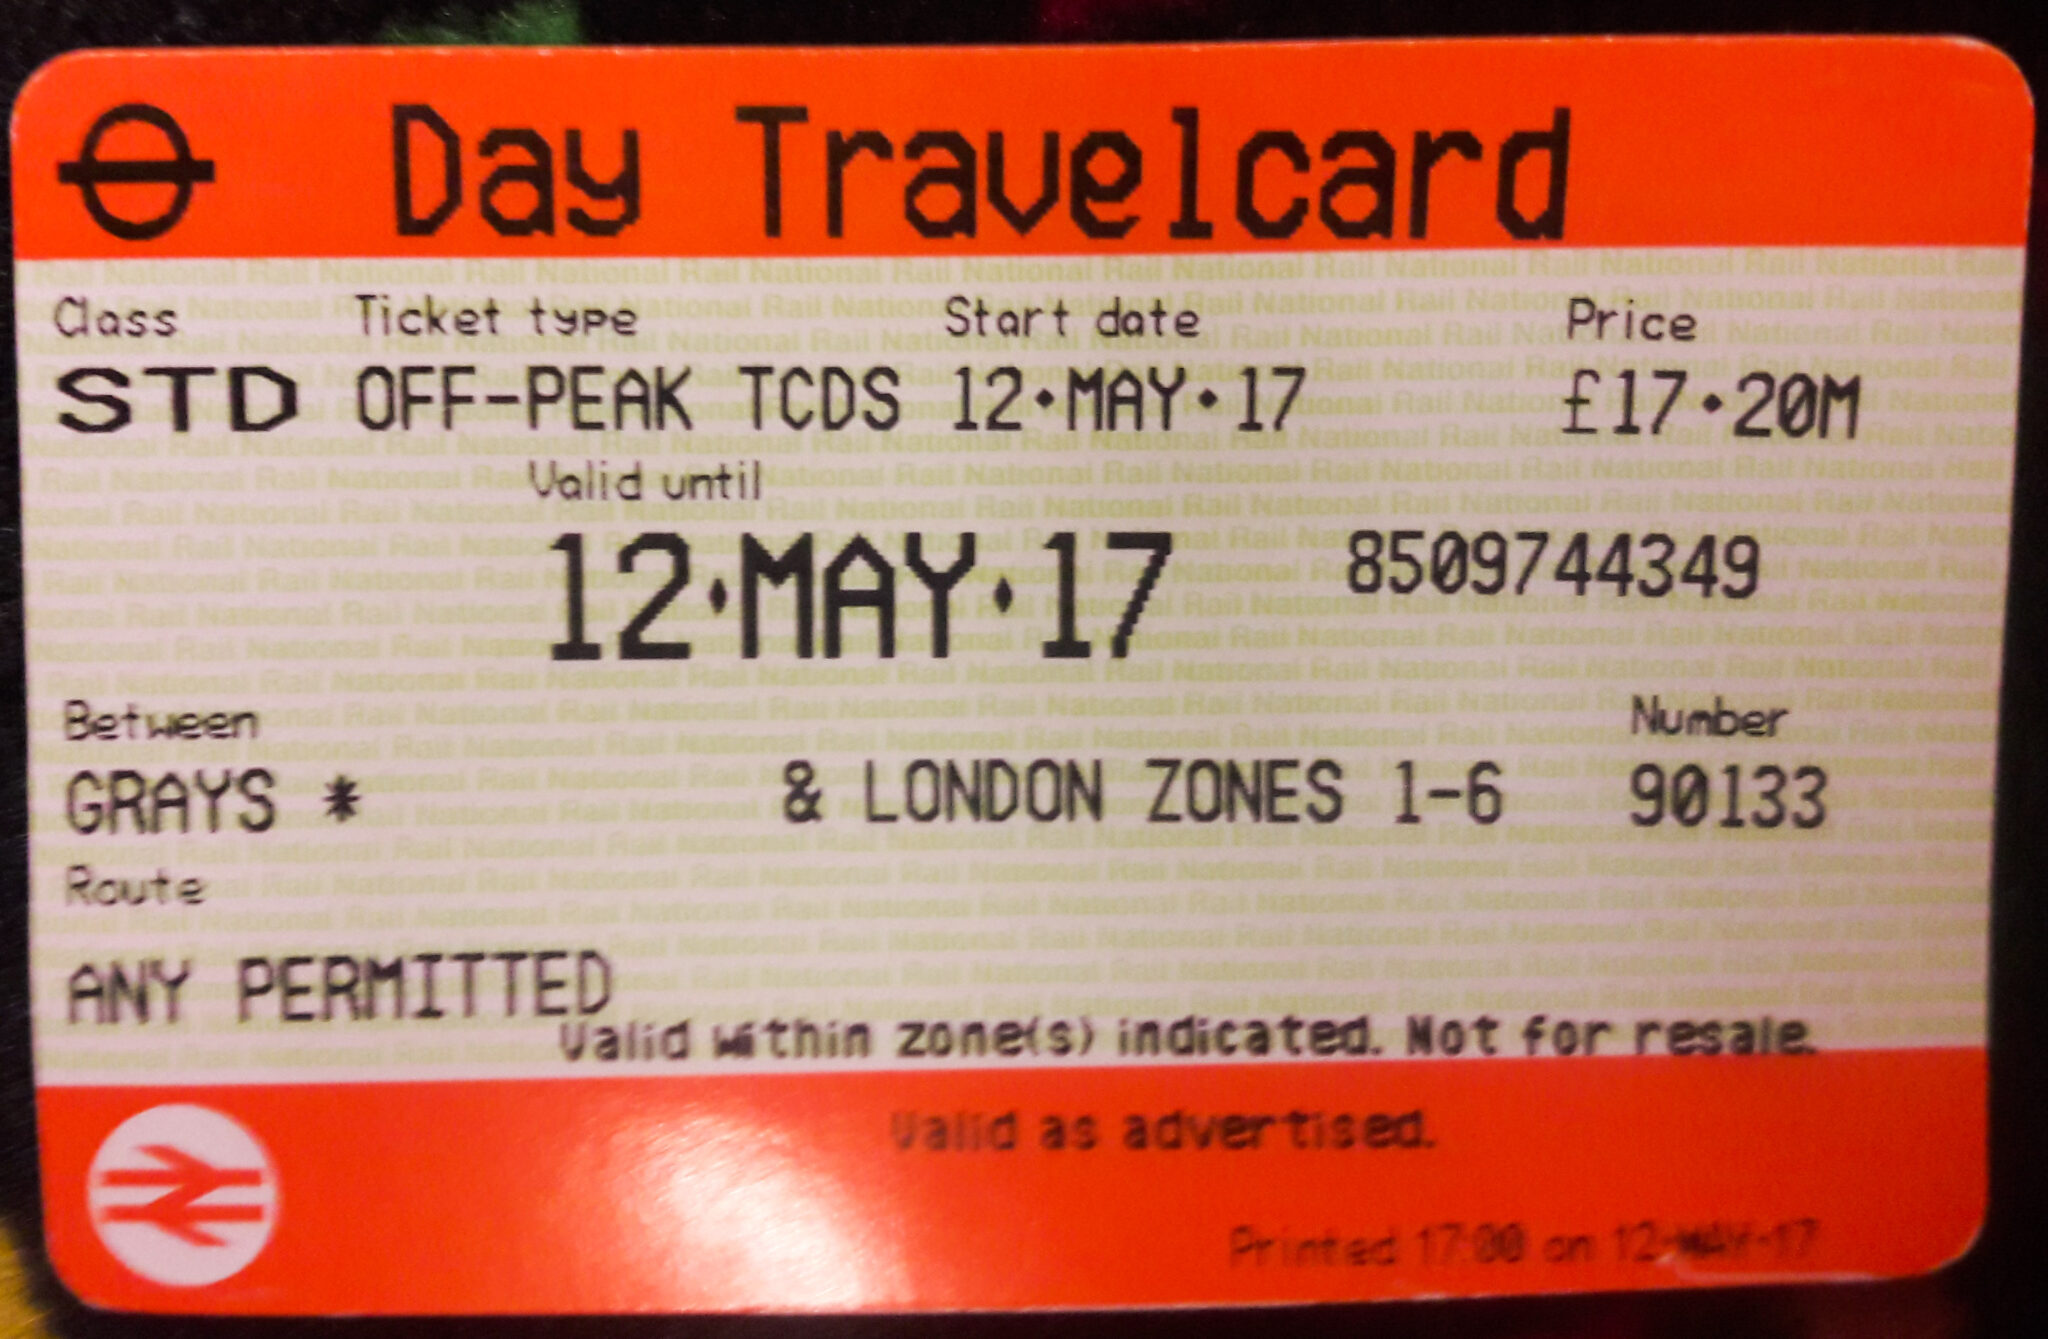 Sample day ticket when I went for a shore leave to London from Grays.